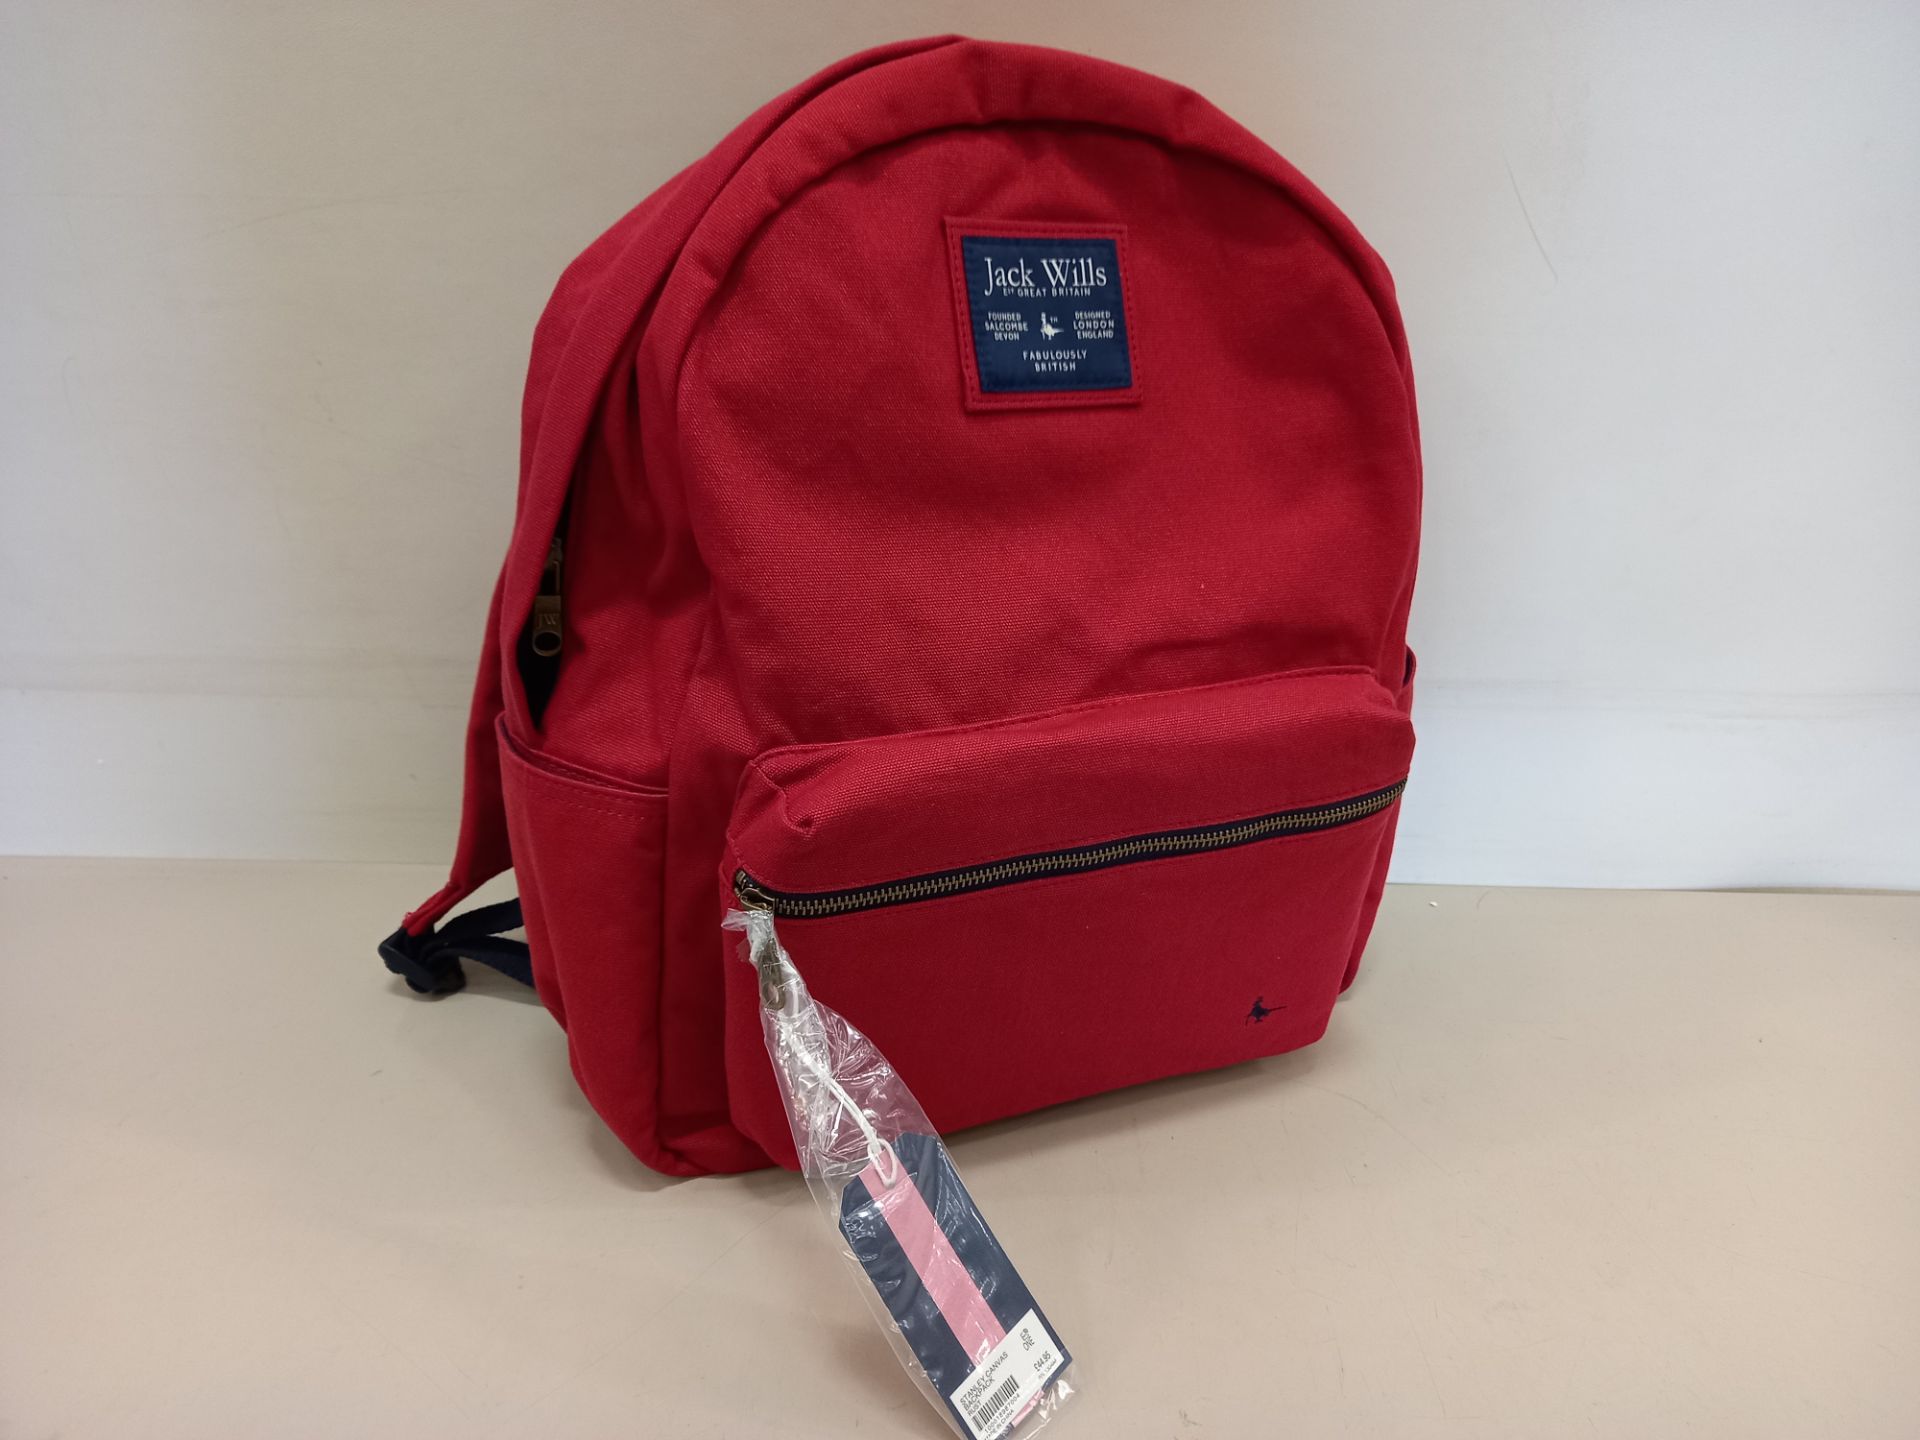 8 X BRAND NEW JACK WILLS STANLEY CANVAS BACKPACKS IN RED (RUST) WITH SWING TICKETS RRP £44.95 EACH